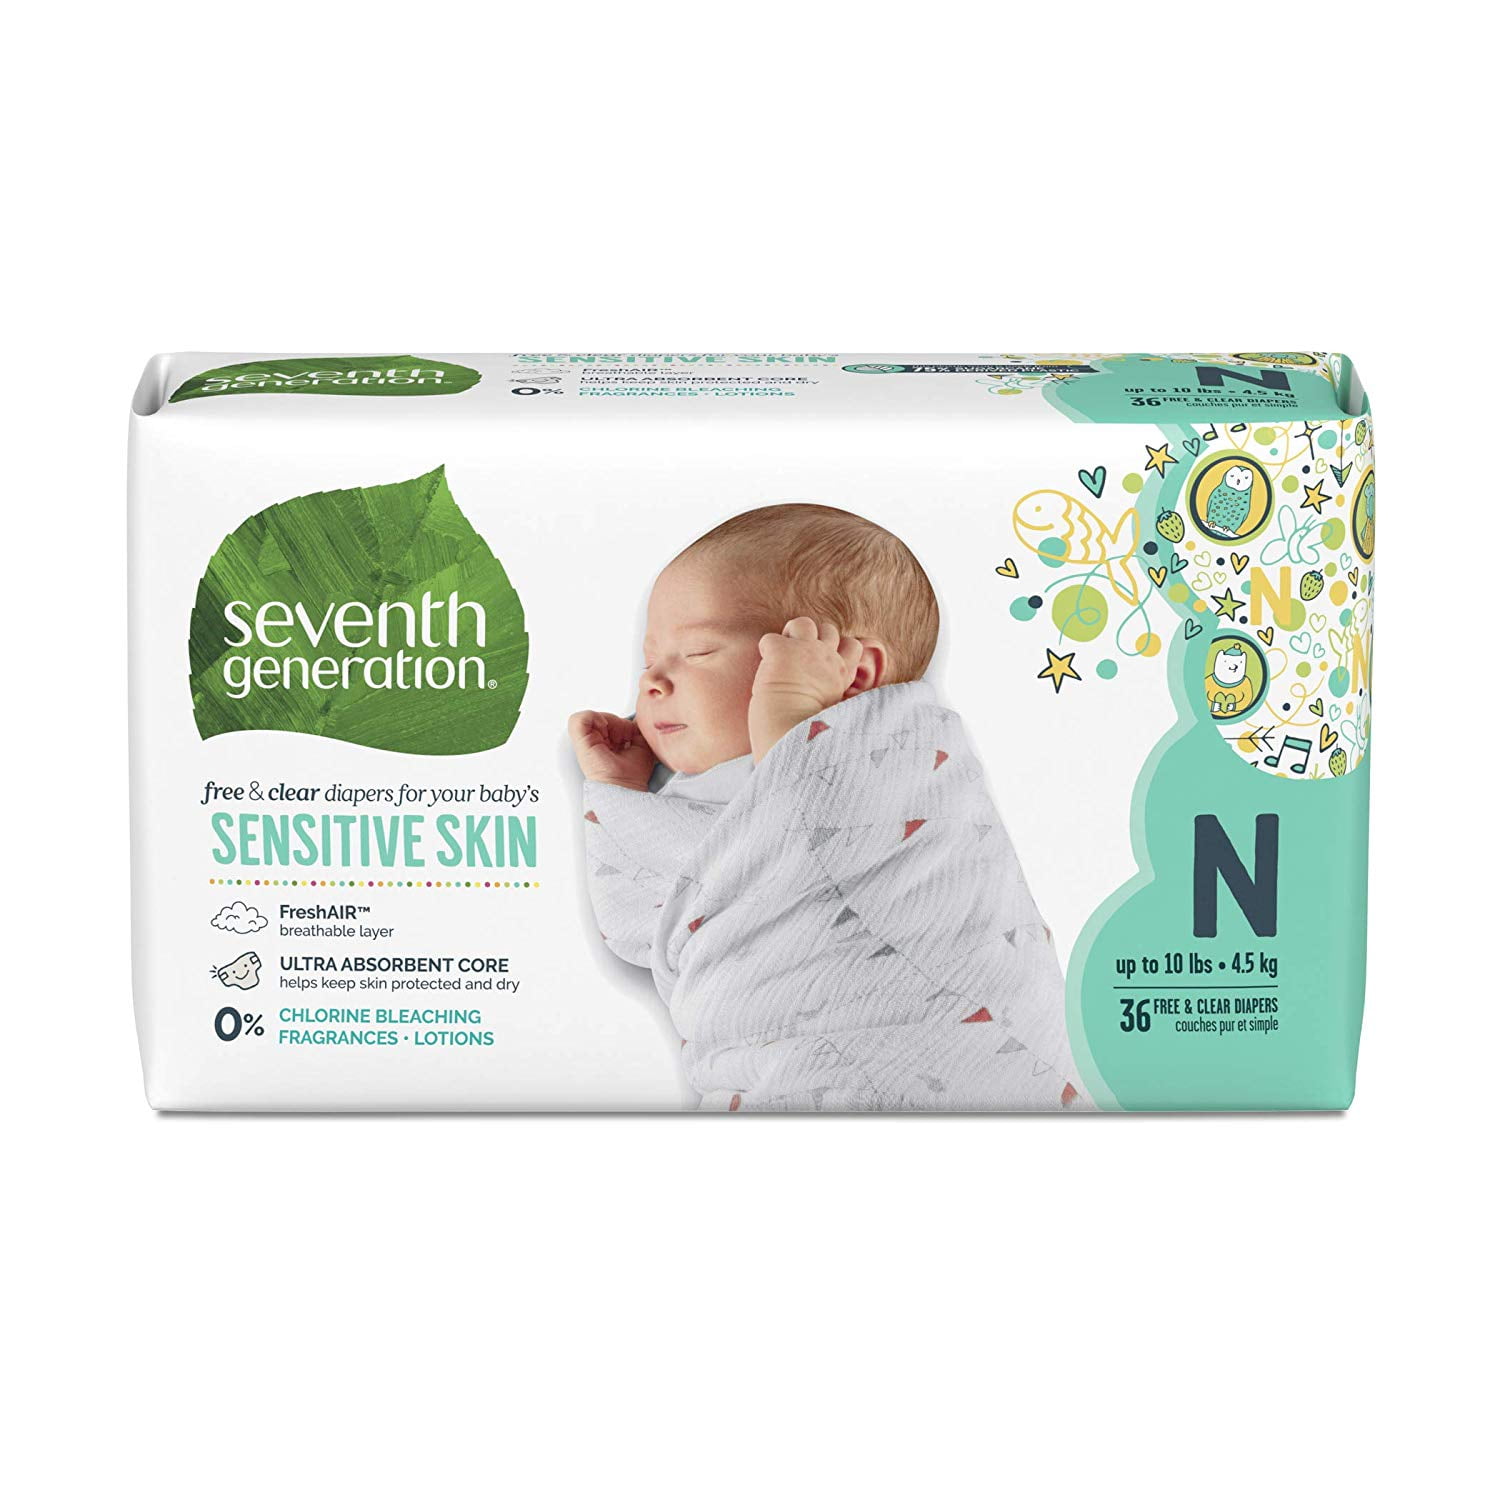 Free & Clear Sensitive Skin Newborn 36 count Seventh Generation Baby Diapers 